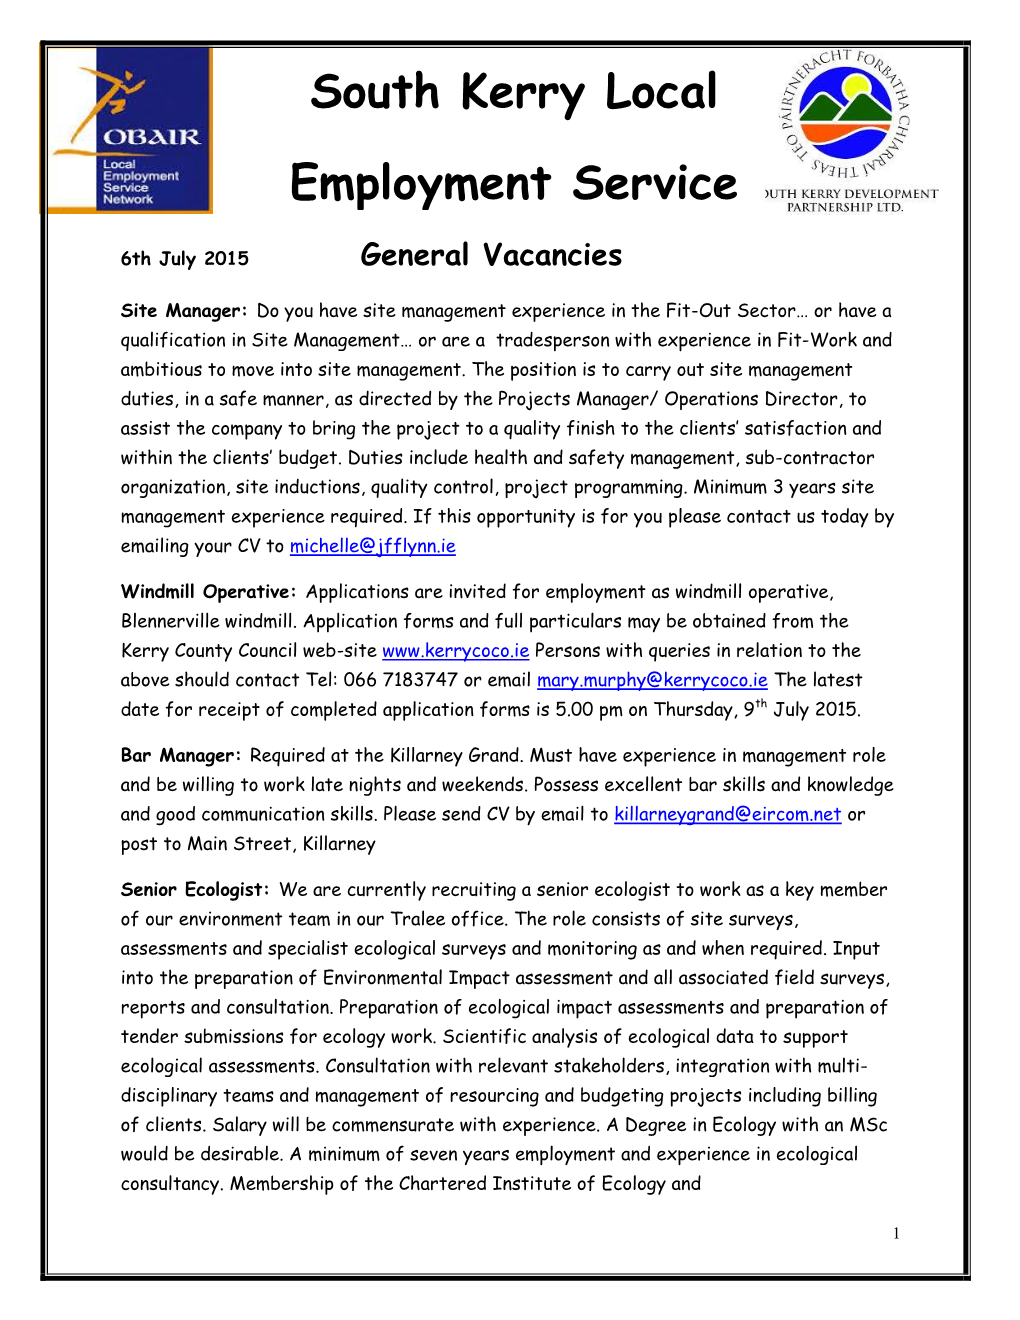 South Kerry Local Employment Service Service